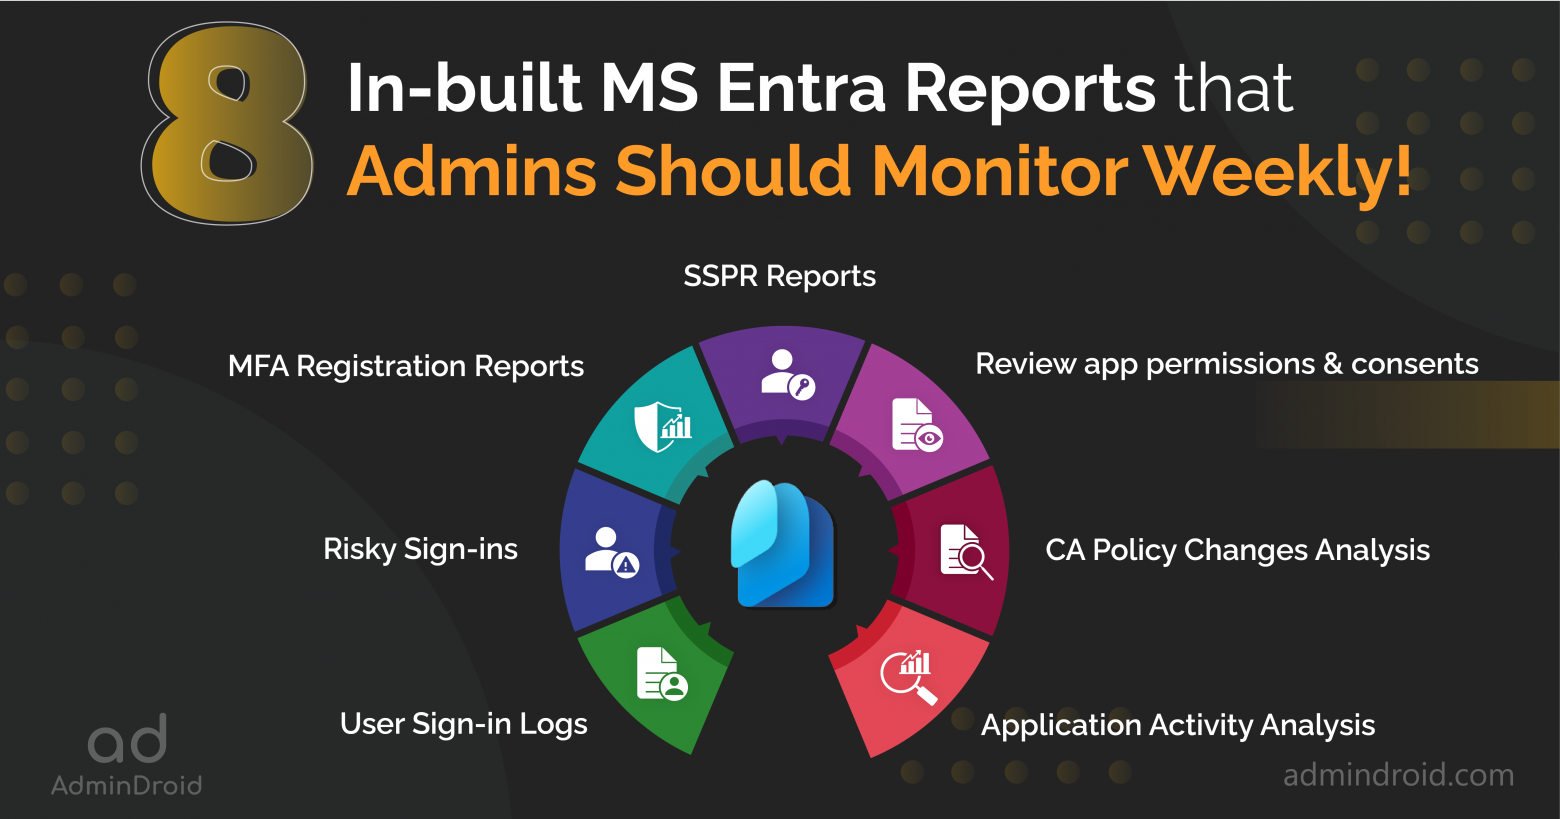 Monitor the 8 In-built MS Entra Reports